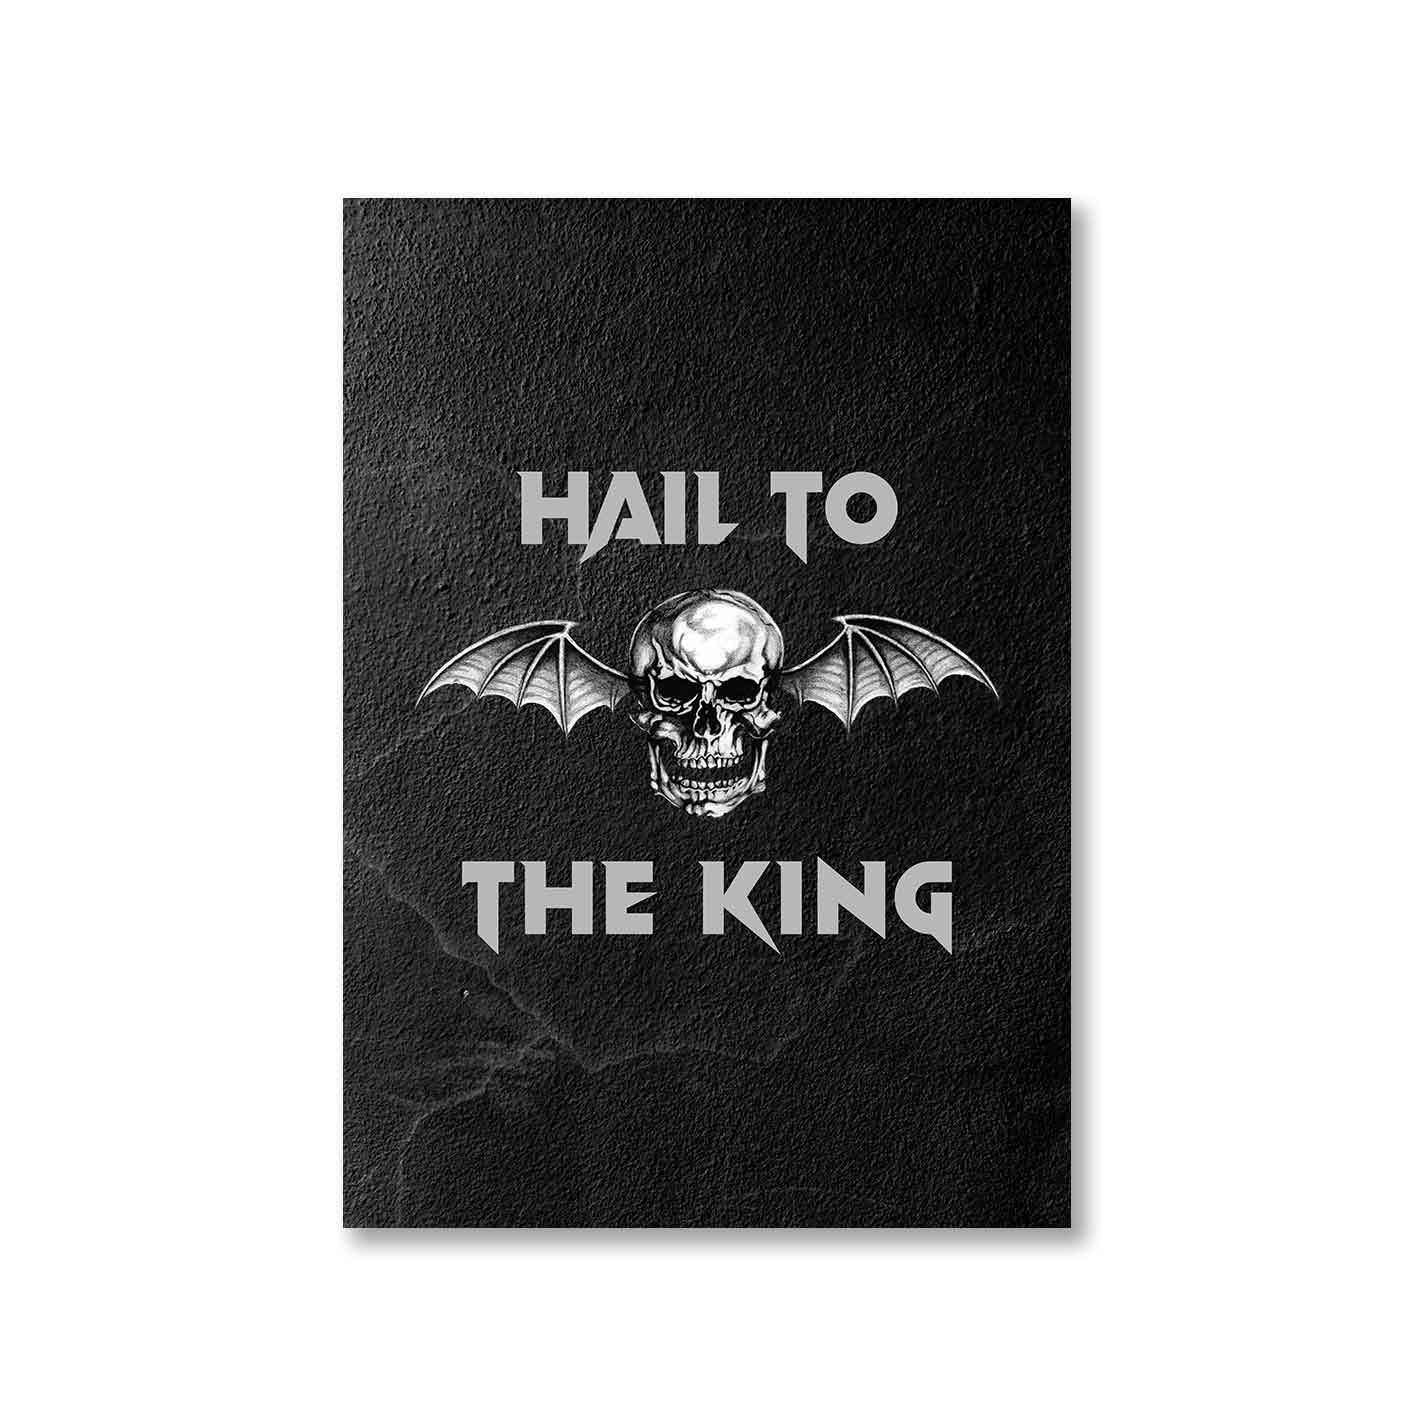 avenged sevenfold hail to the king poster wall art buy online india the banyan tee tbt a4